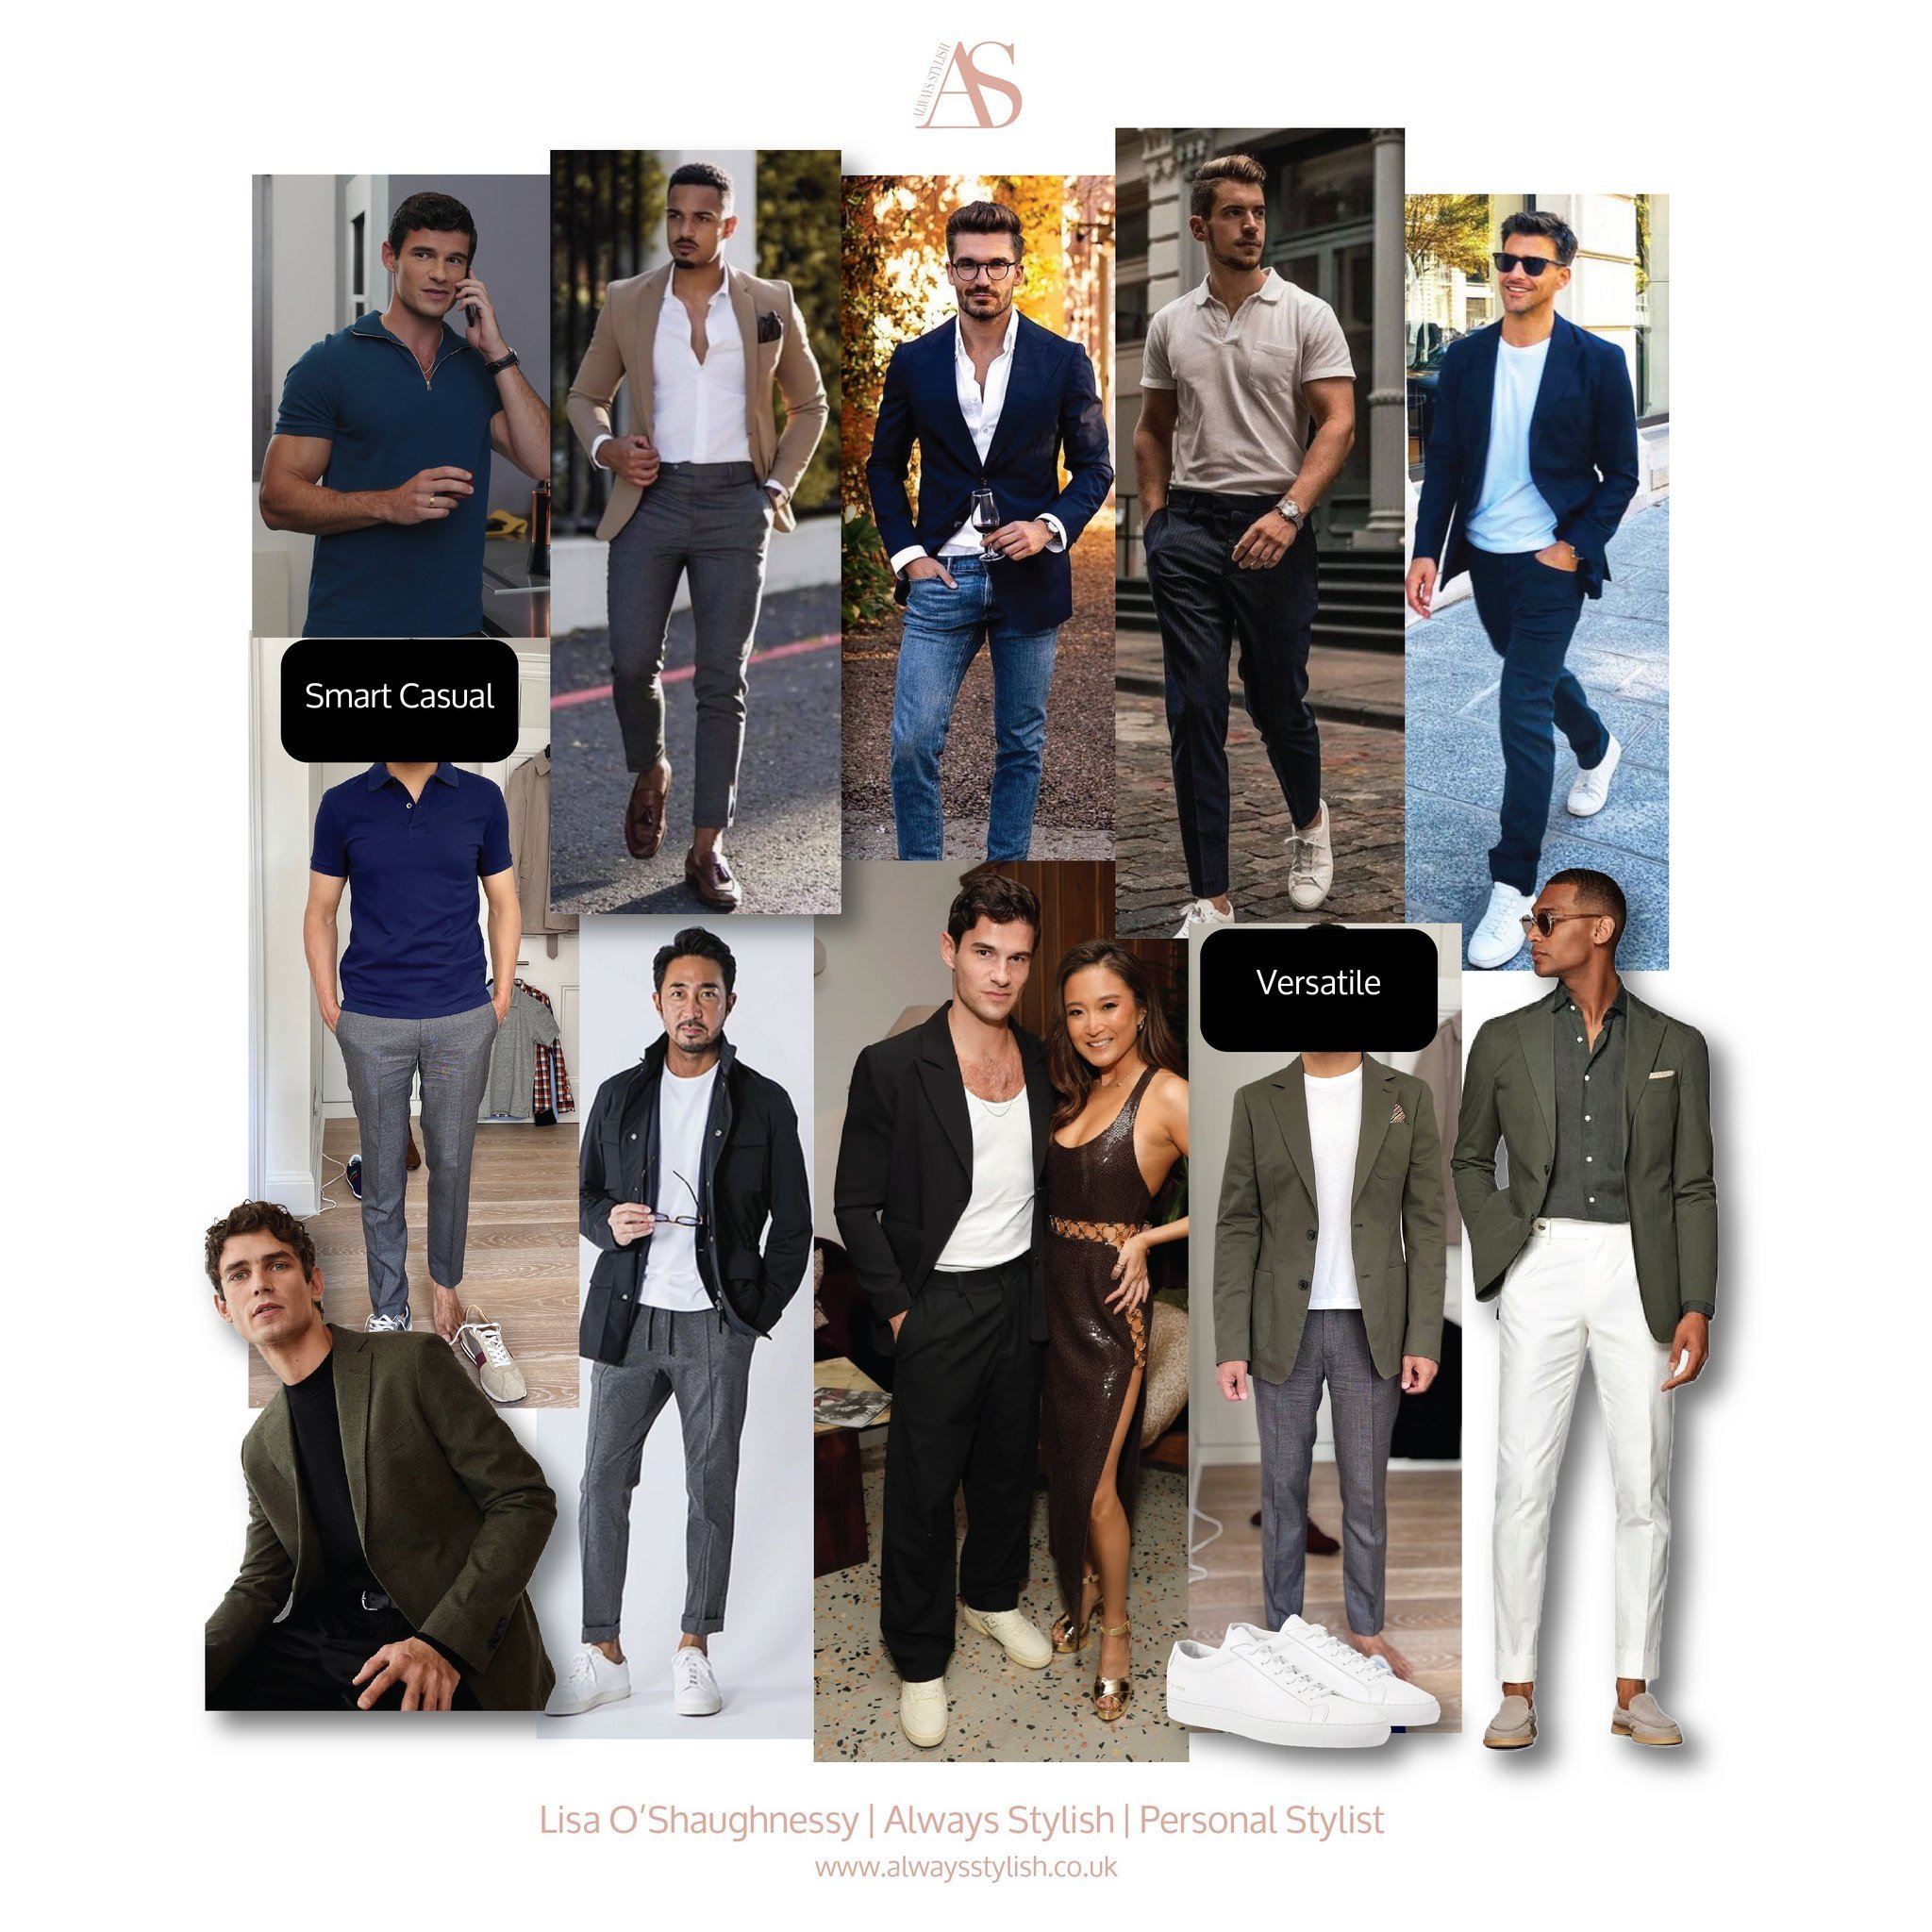 It's not only women that get inspired by Emily in Paris! 😀 The sharp suave Nicholas de Leon character inspired my male client. A client I haven't seen for a couple of years, who appears on the mood board (face under text) to give him an idea of how 